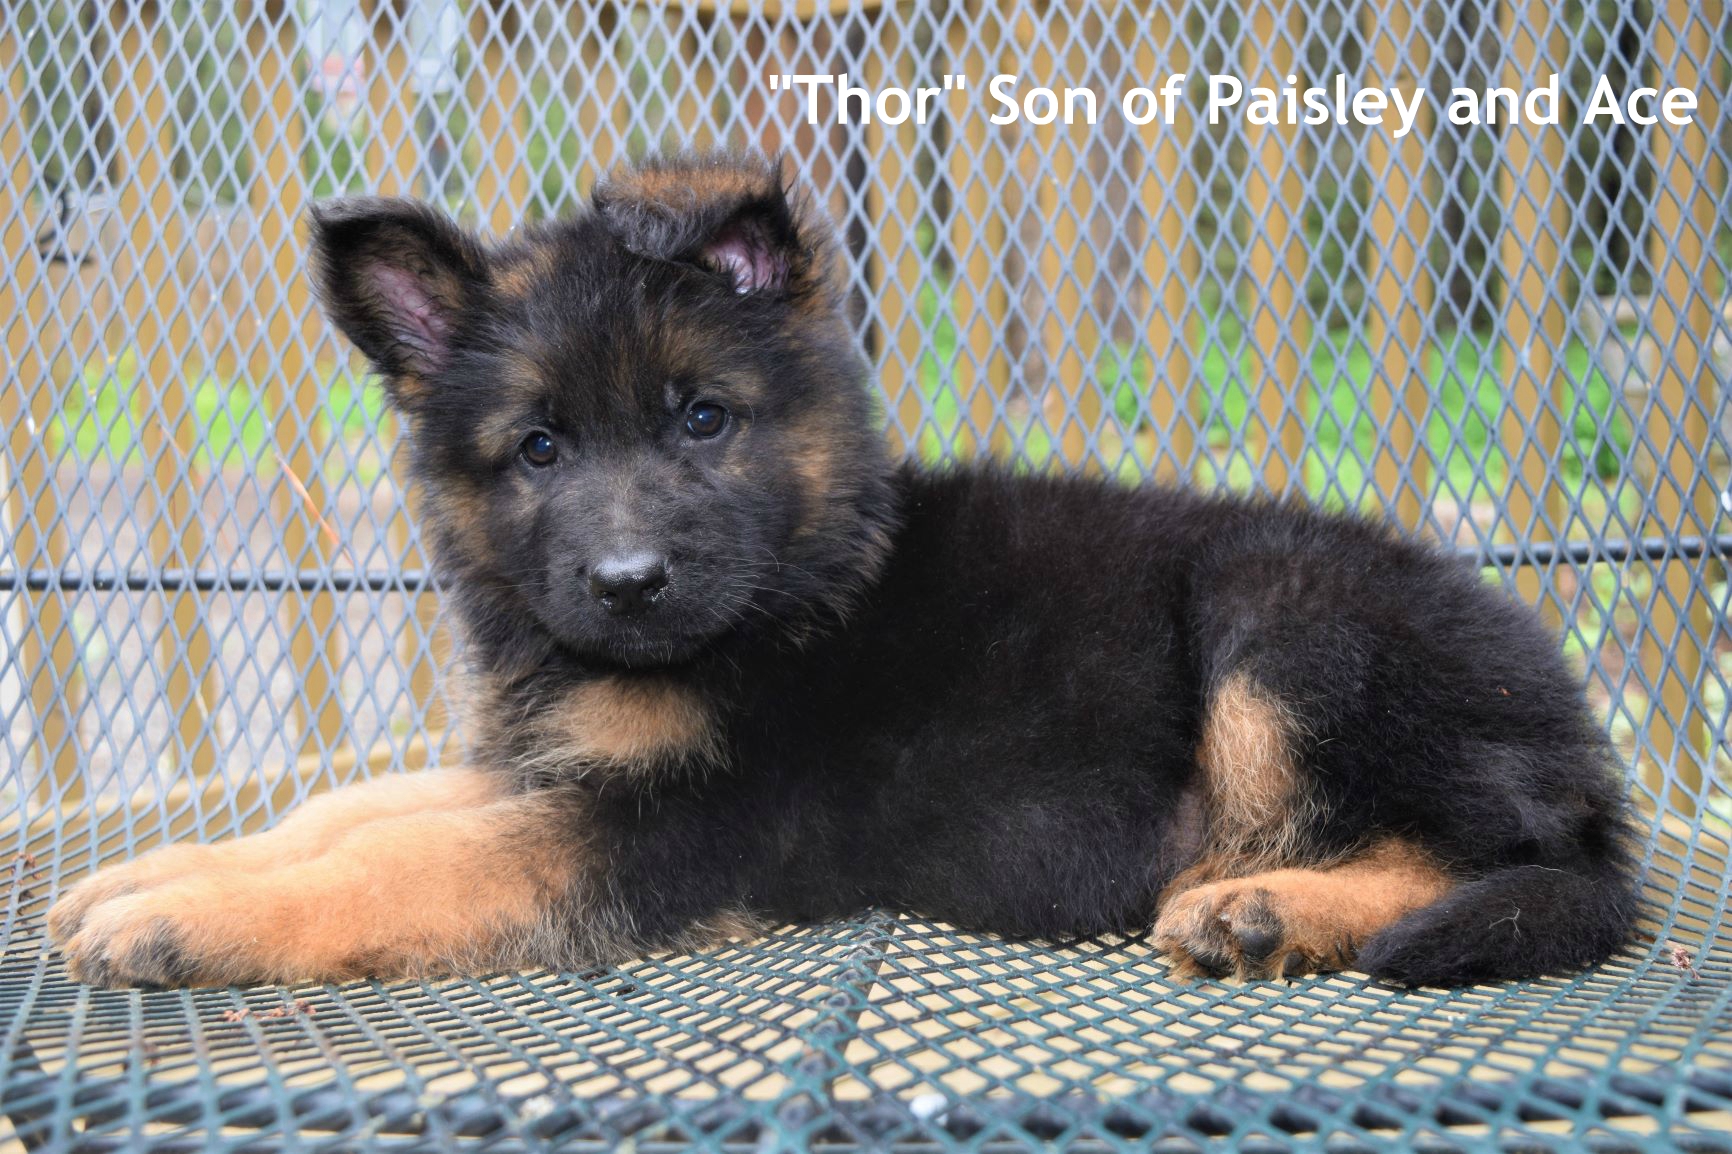 Thor Son of Paisley and Ace